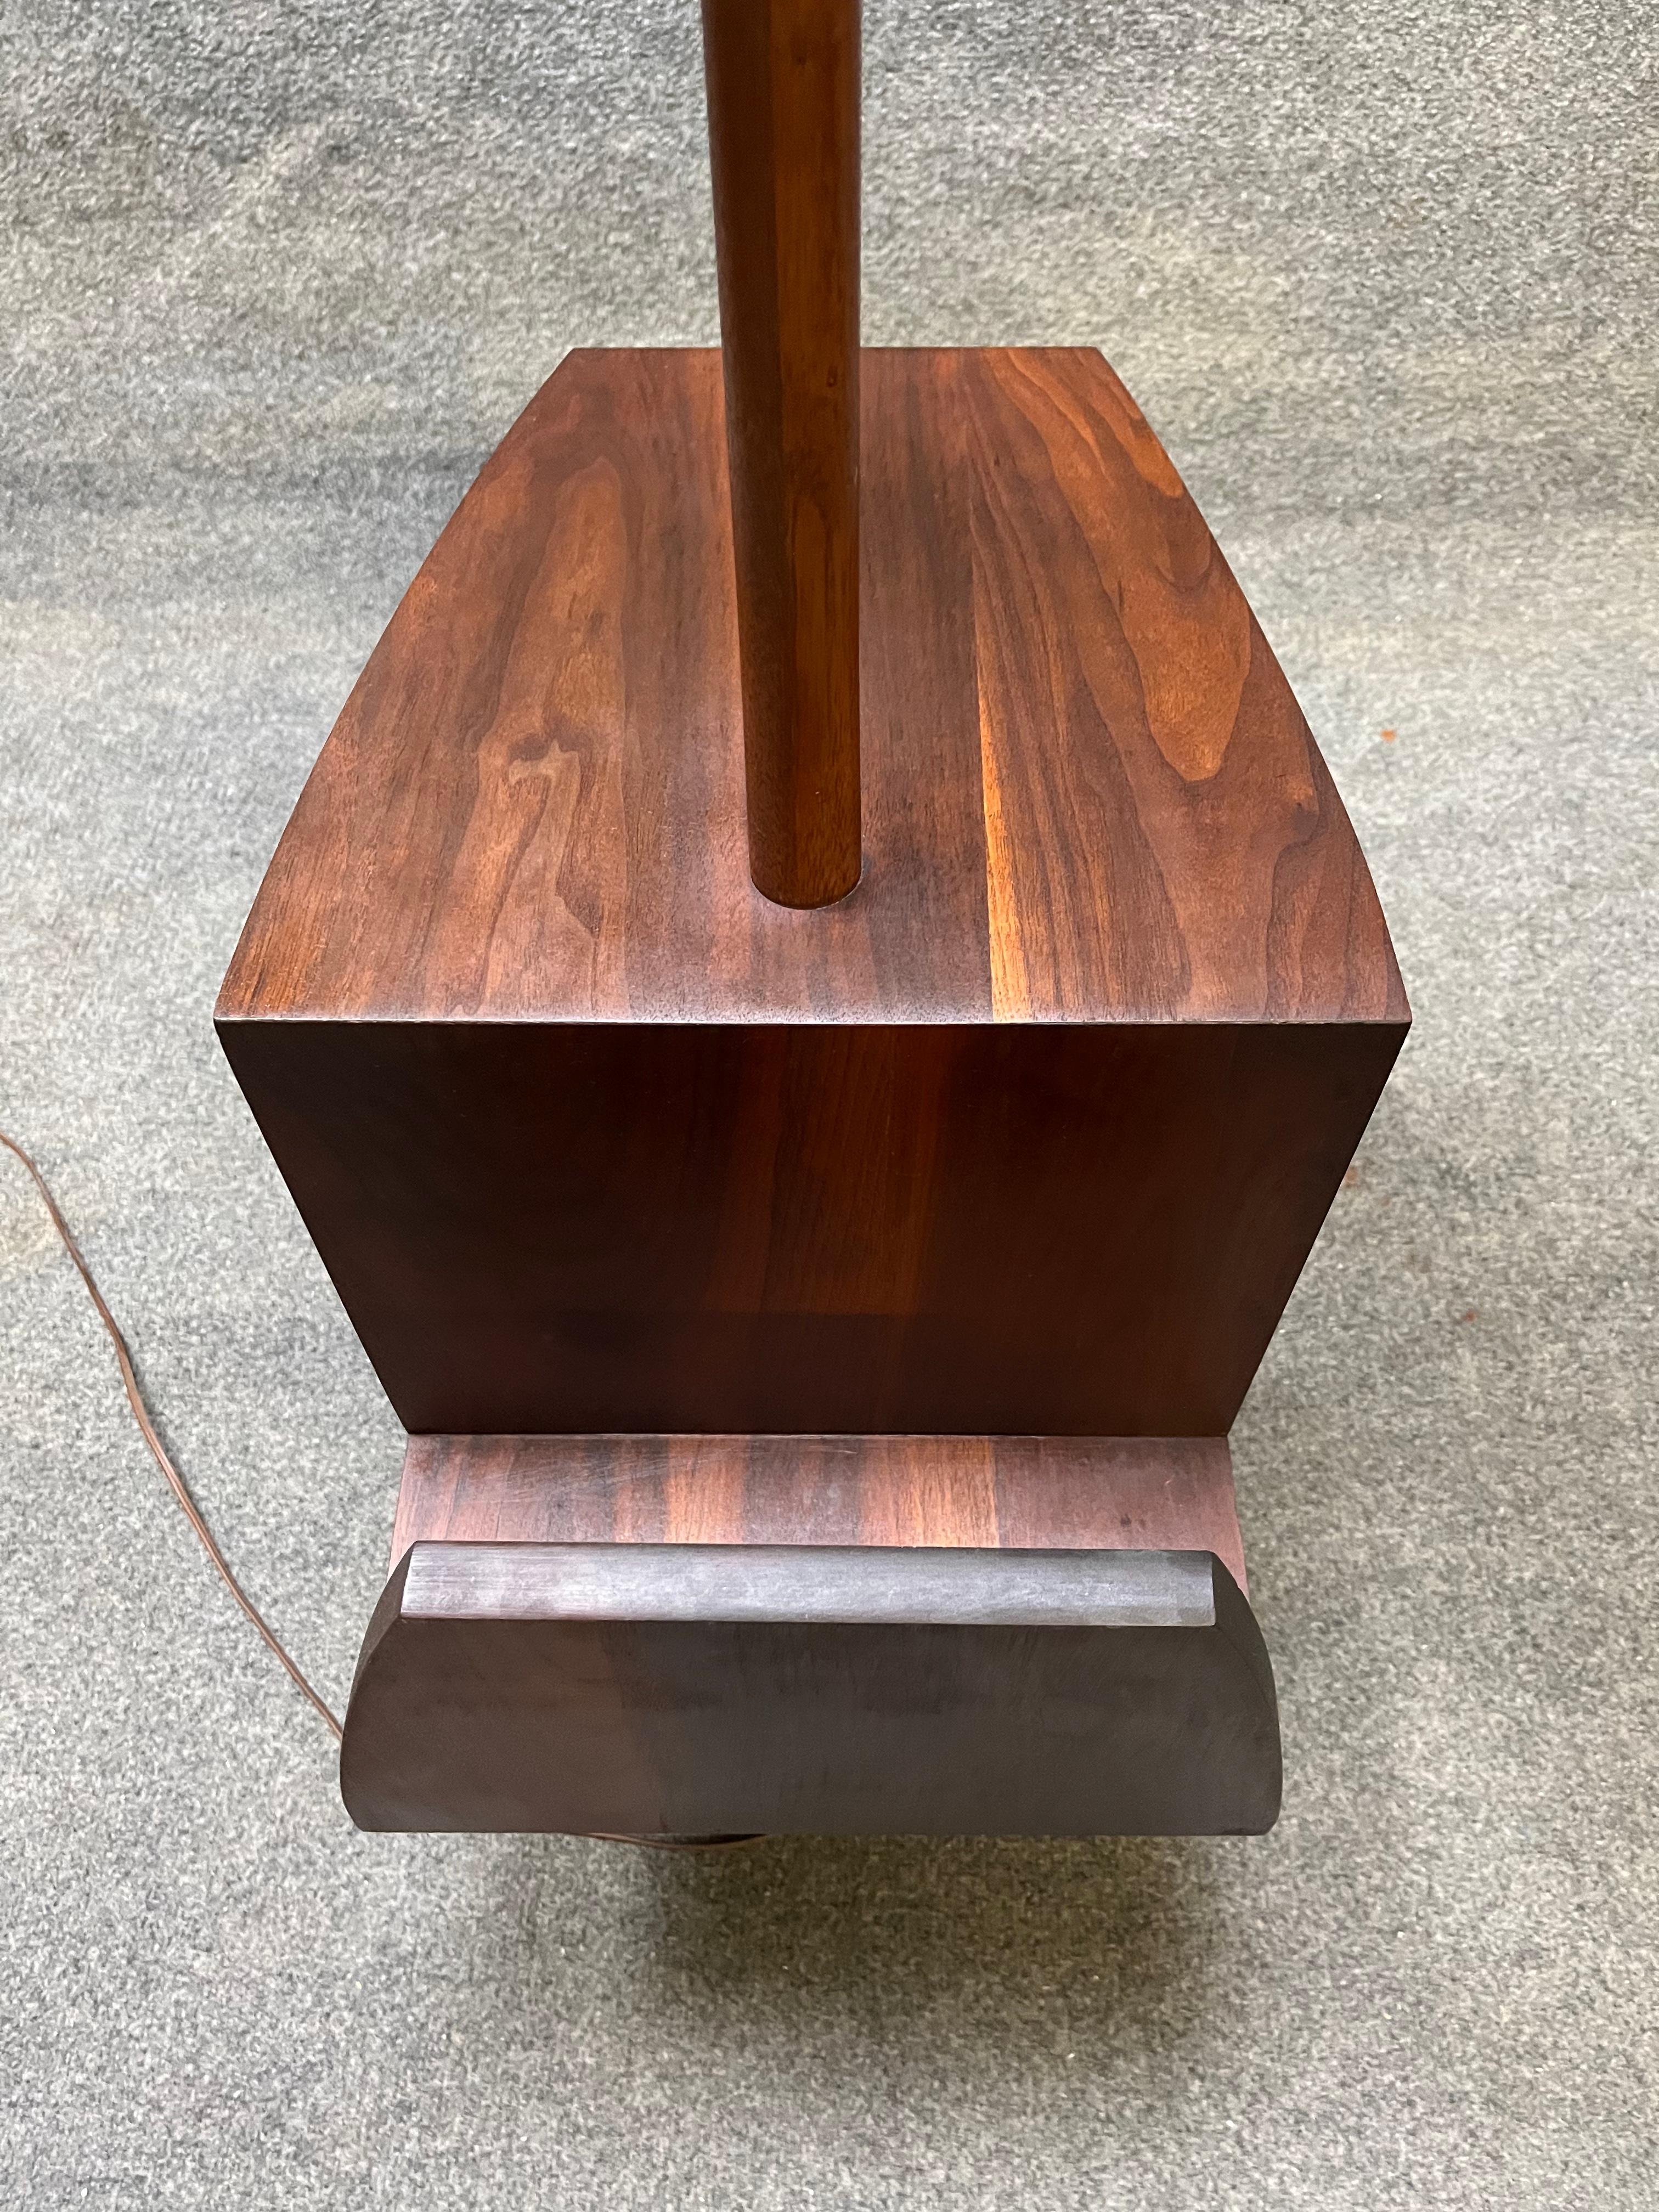 Here is an amazing vintage mid century solid black walnut floor lamp with built in table and magazine rack. This piece is so cool! Would look great next to a lounge chair or sofa. Lamp has a brand new off white linen lamp shade. Lamp is in good